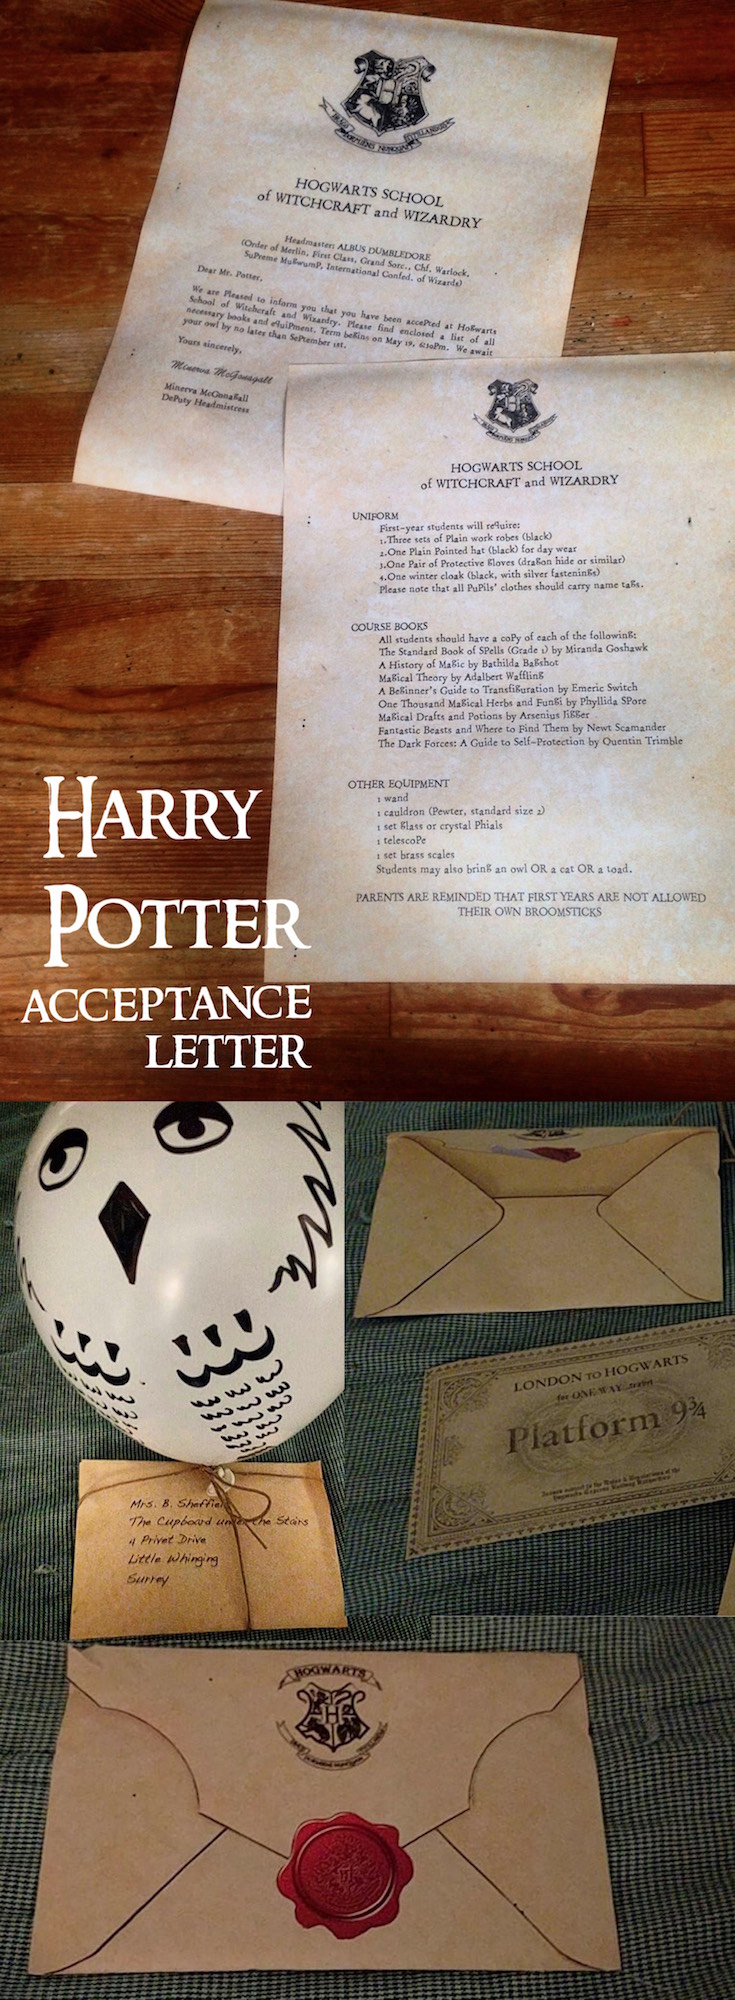 Personalized Harry Potter Acceptance Letter Hogwarts School of Witchcraft and Wizardry